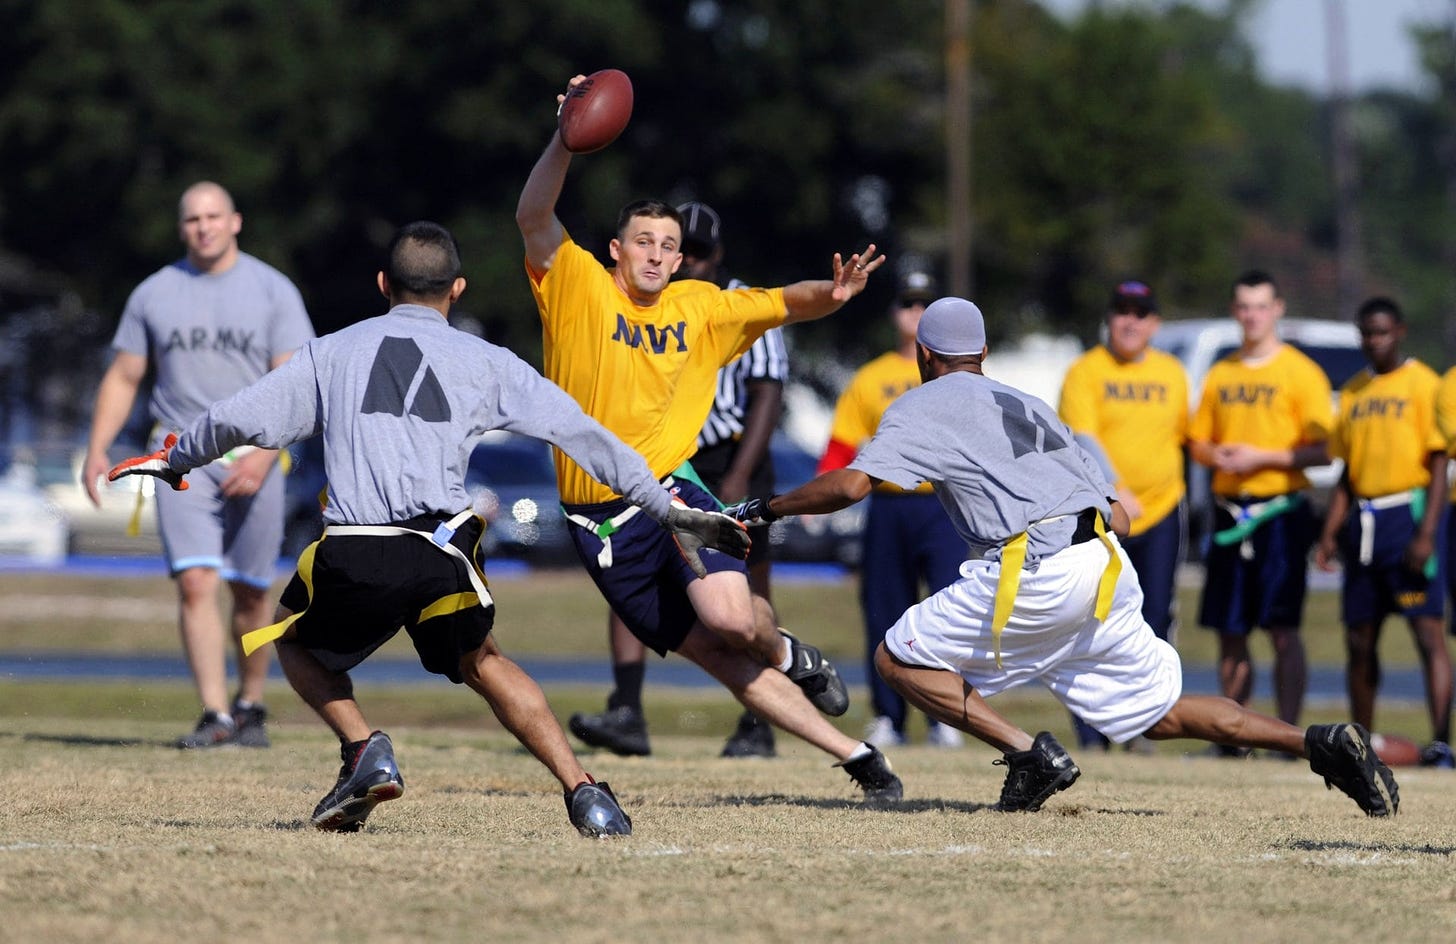 flag football born in the us military with players in a game